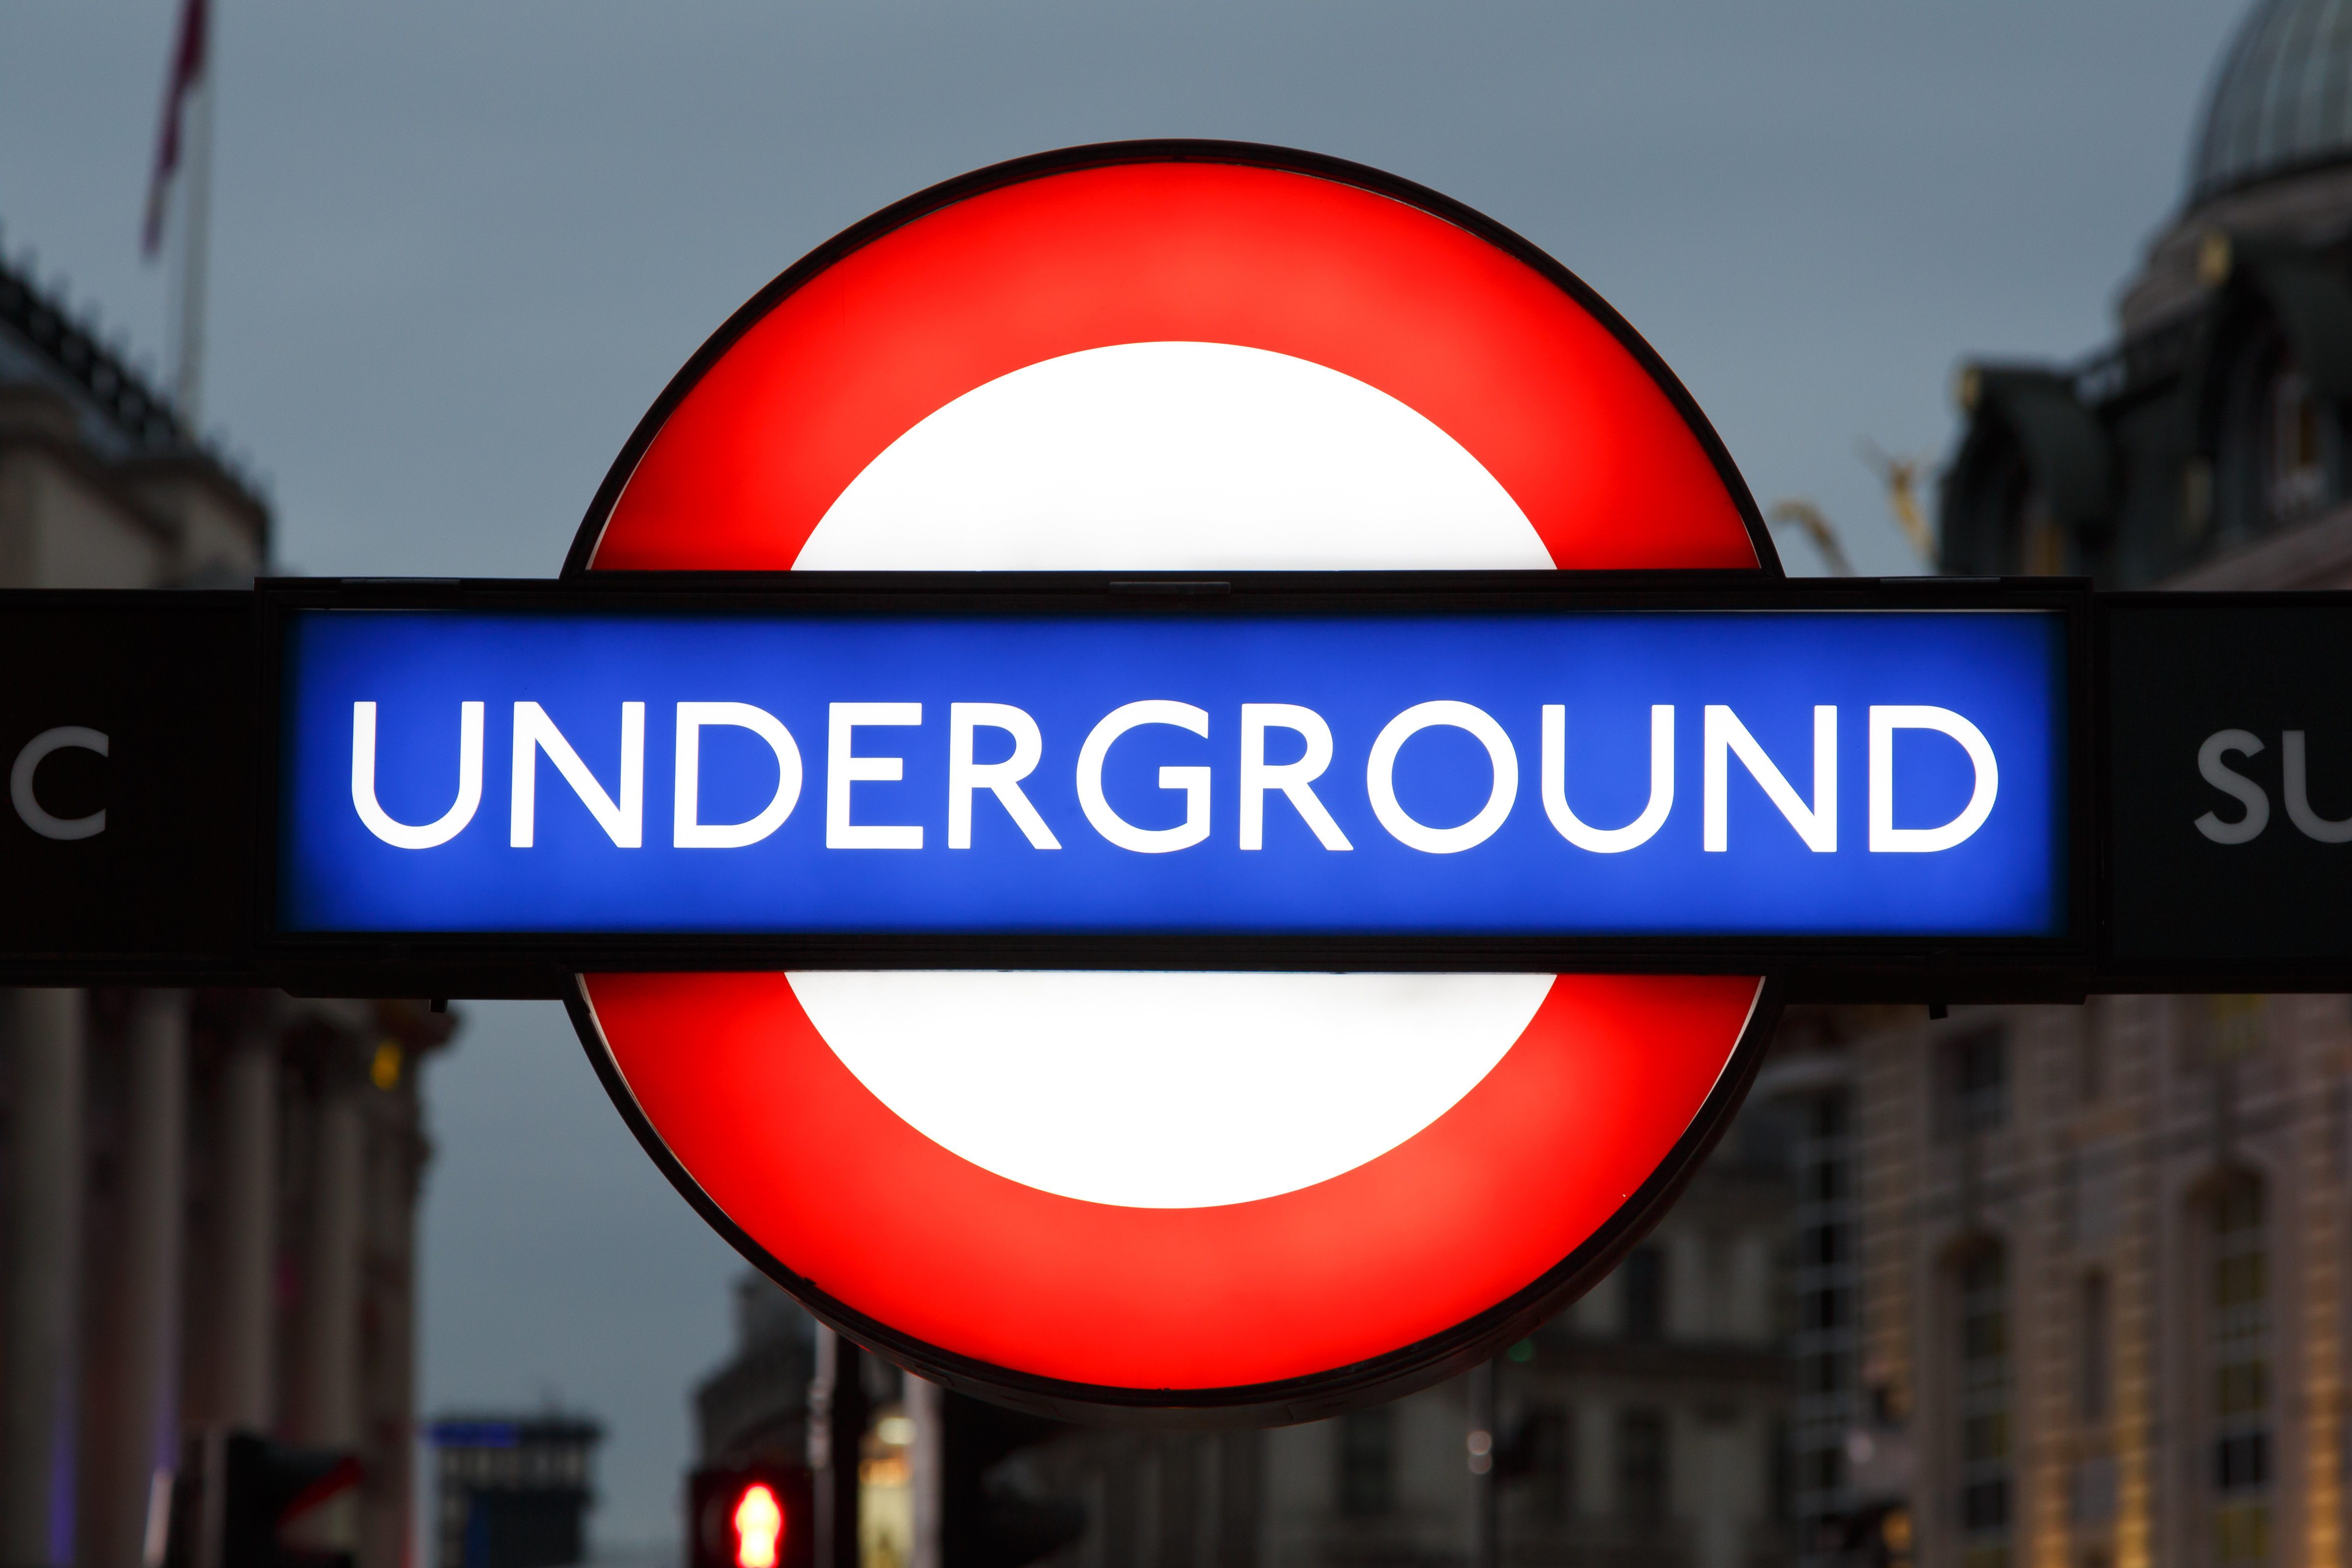 <strong>A man has been charged with attempted murder over an incident on the London Underground&nbsp;</strong>